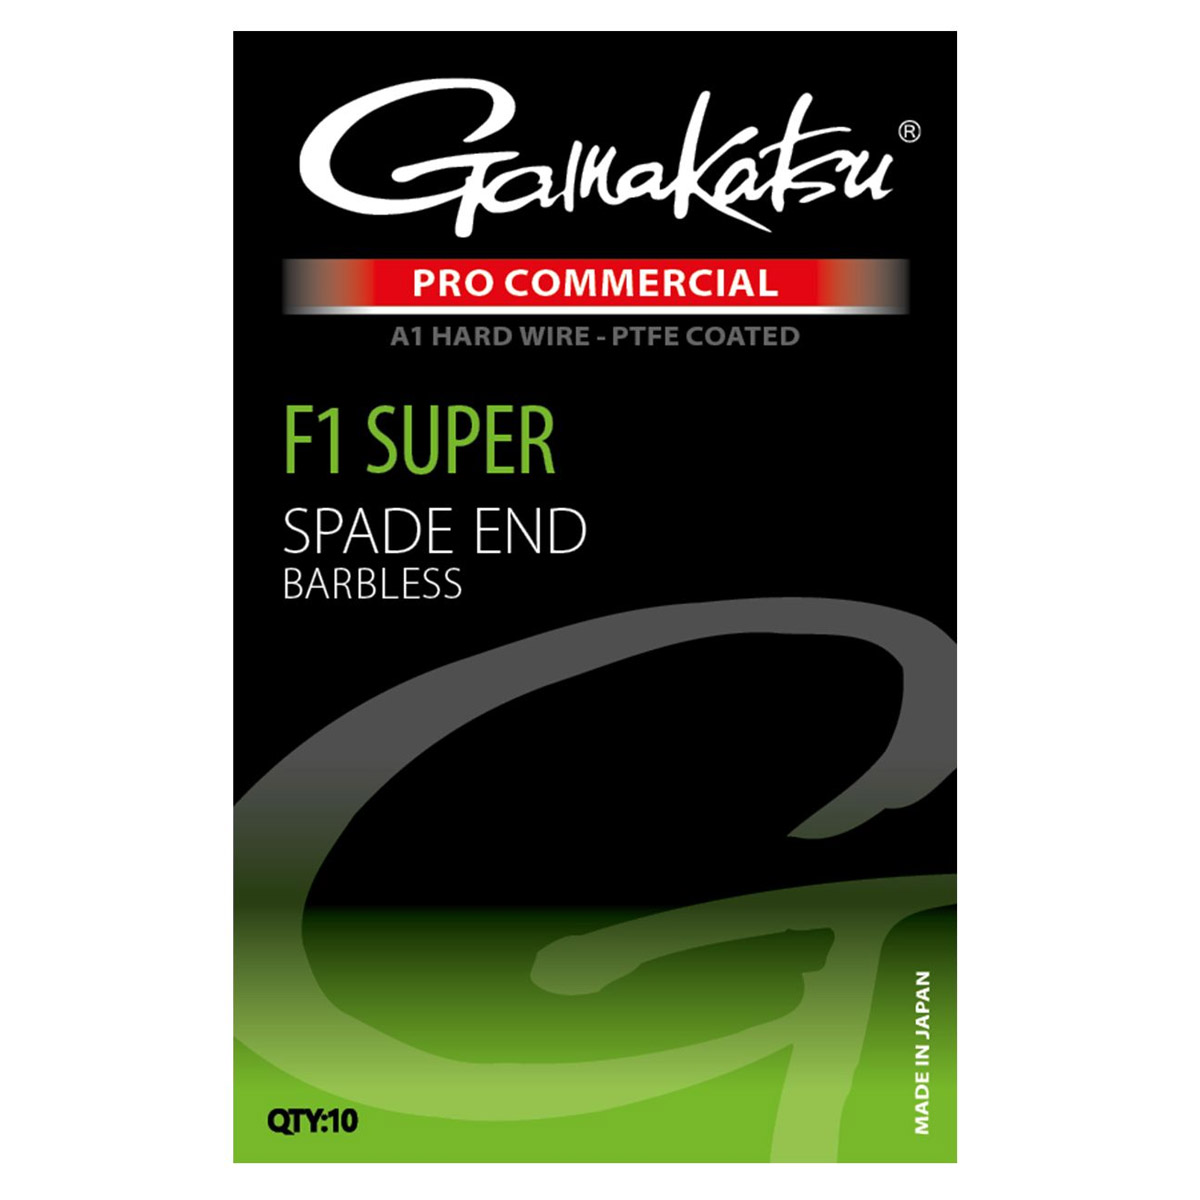 Gamakatsu Pro Commercial F1 Super A1 Spade End Barbless